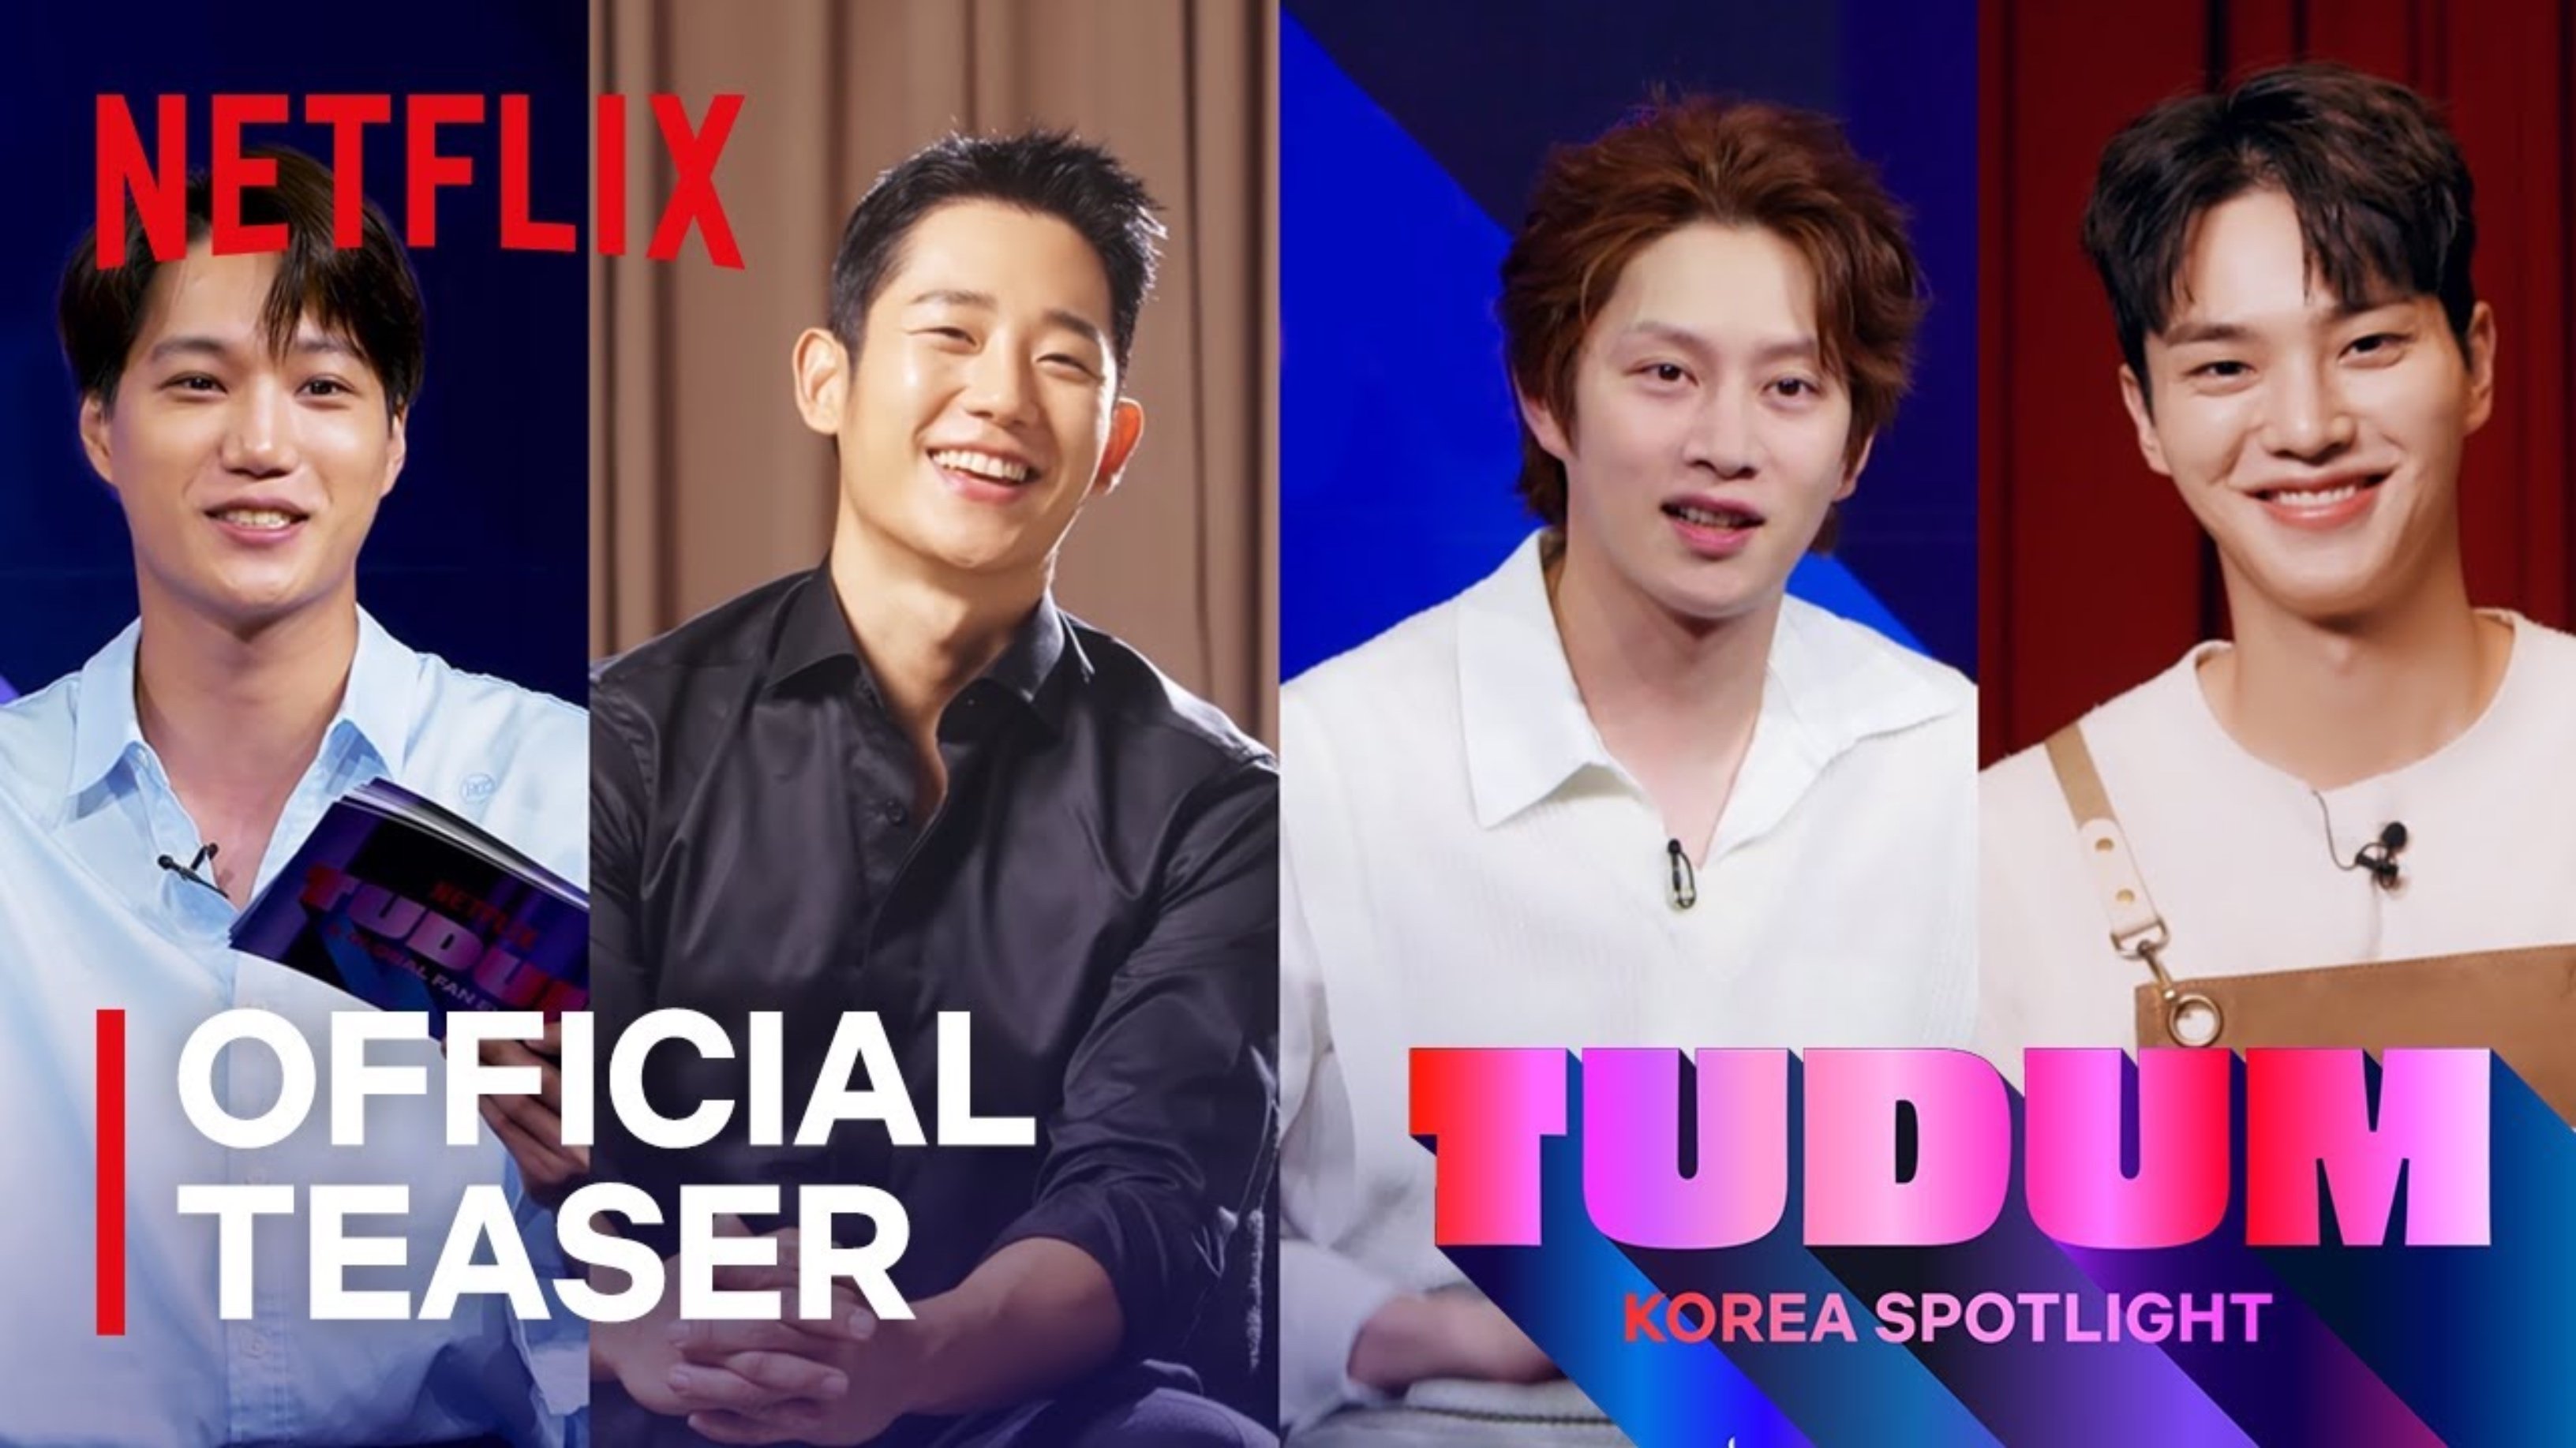 Kai, Jung Hae-In, Kim Hee-Chul and Song Kang for 'Tudum: Korea Spotlight' Netflix event wearing button up shirts on set